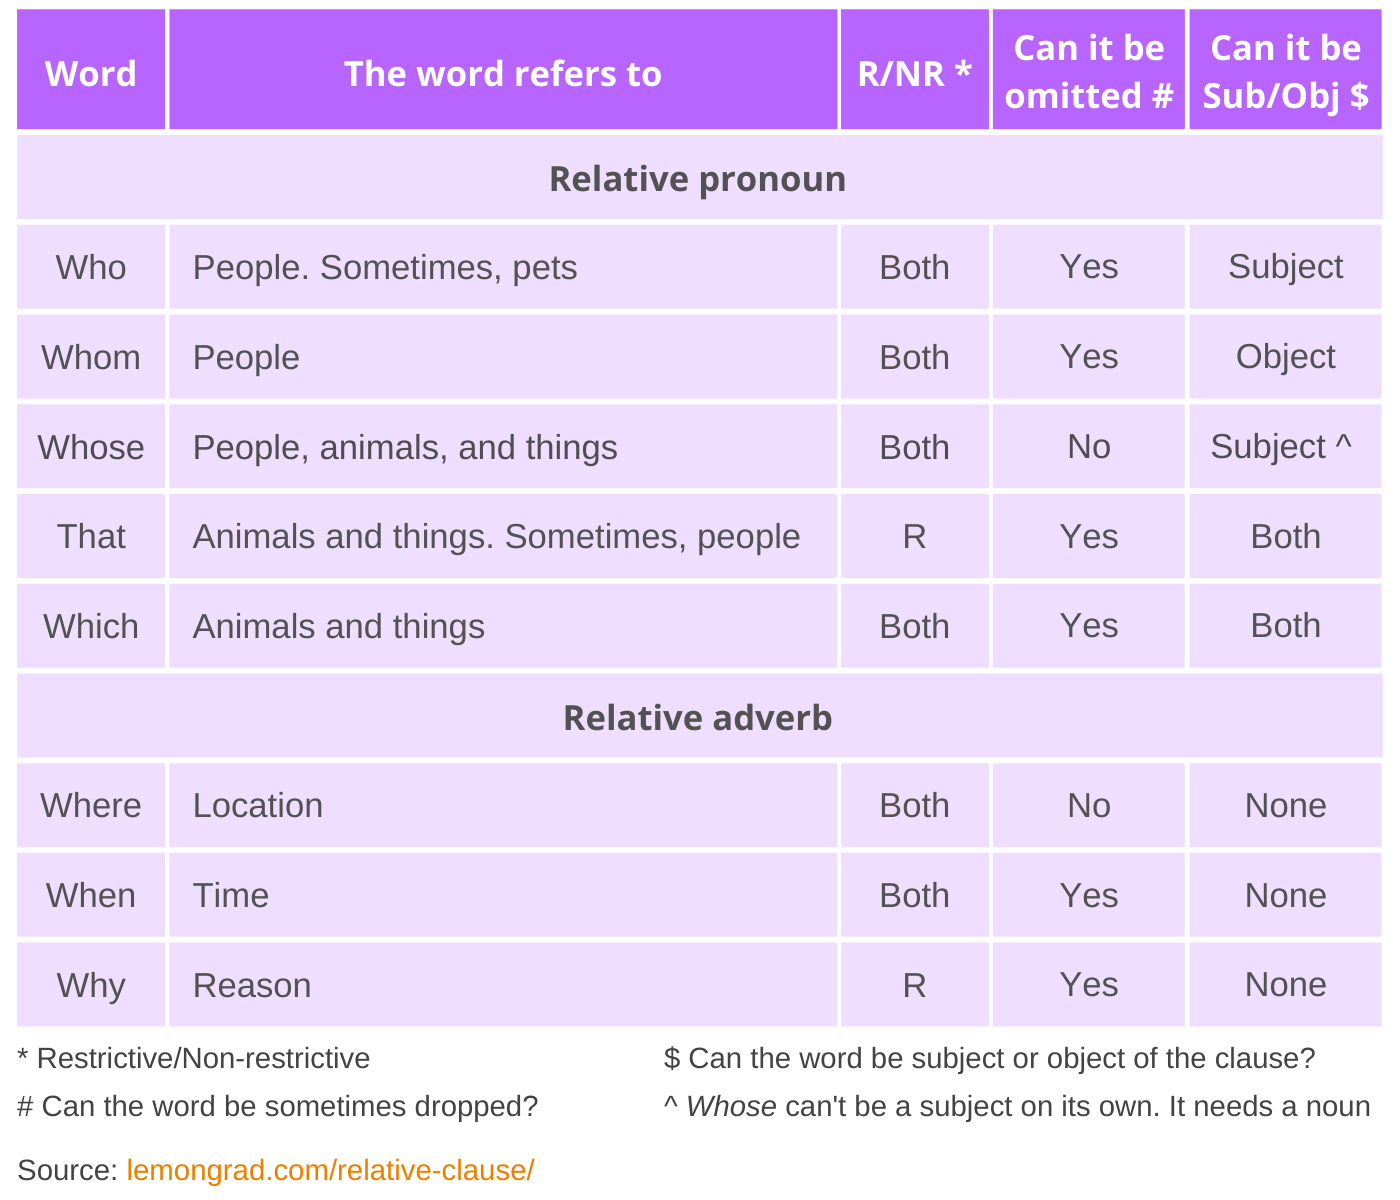 Summary of relative pronouns and relative adverbs